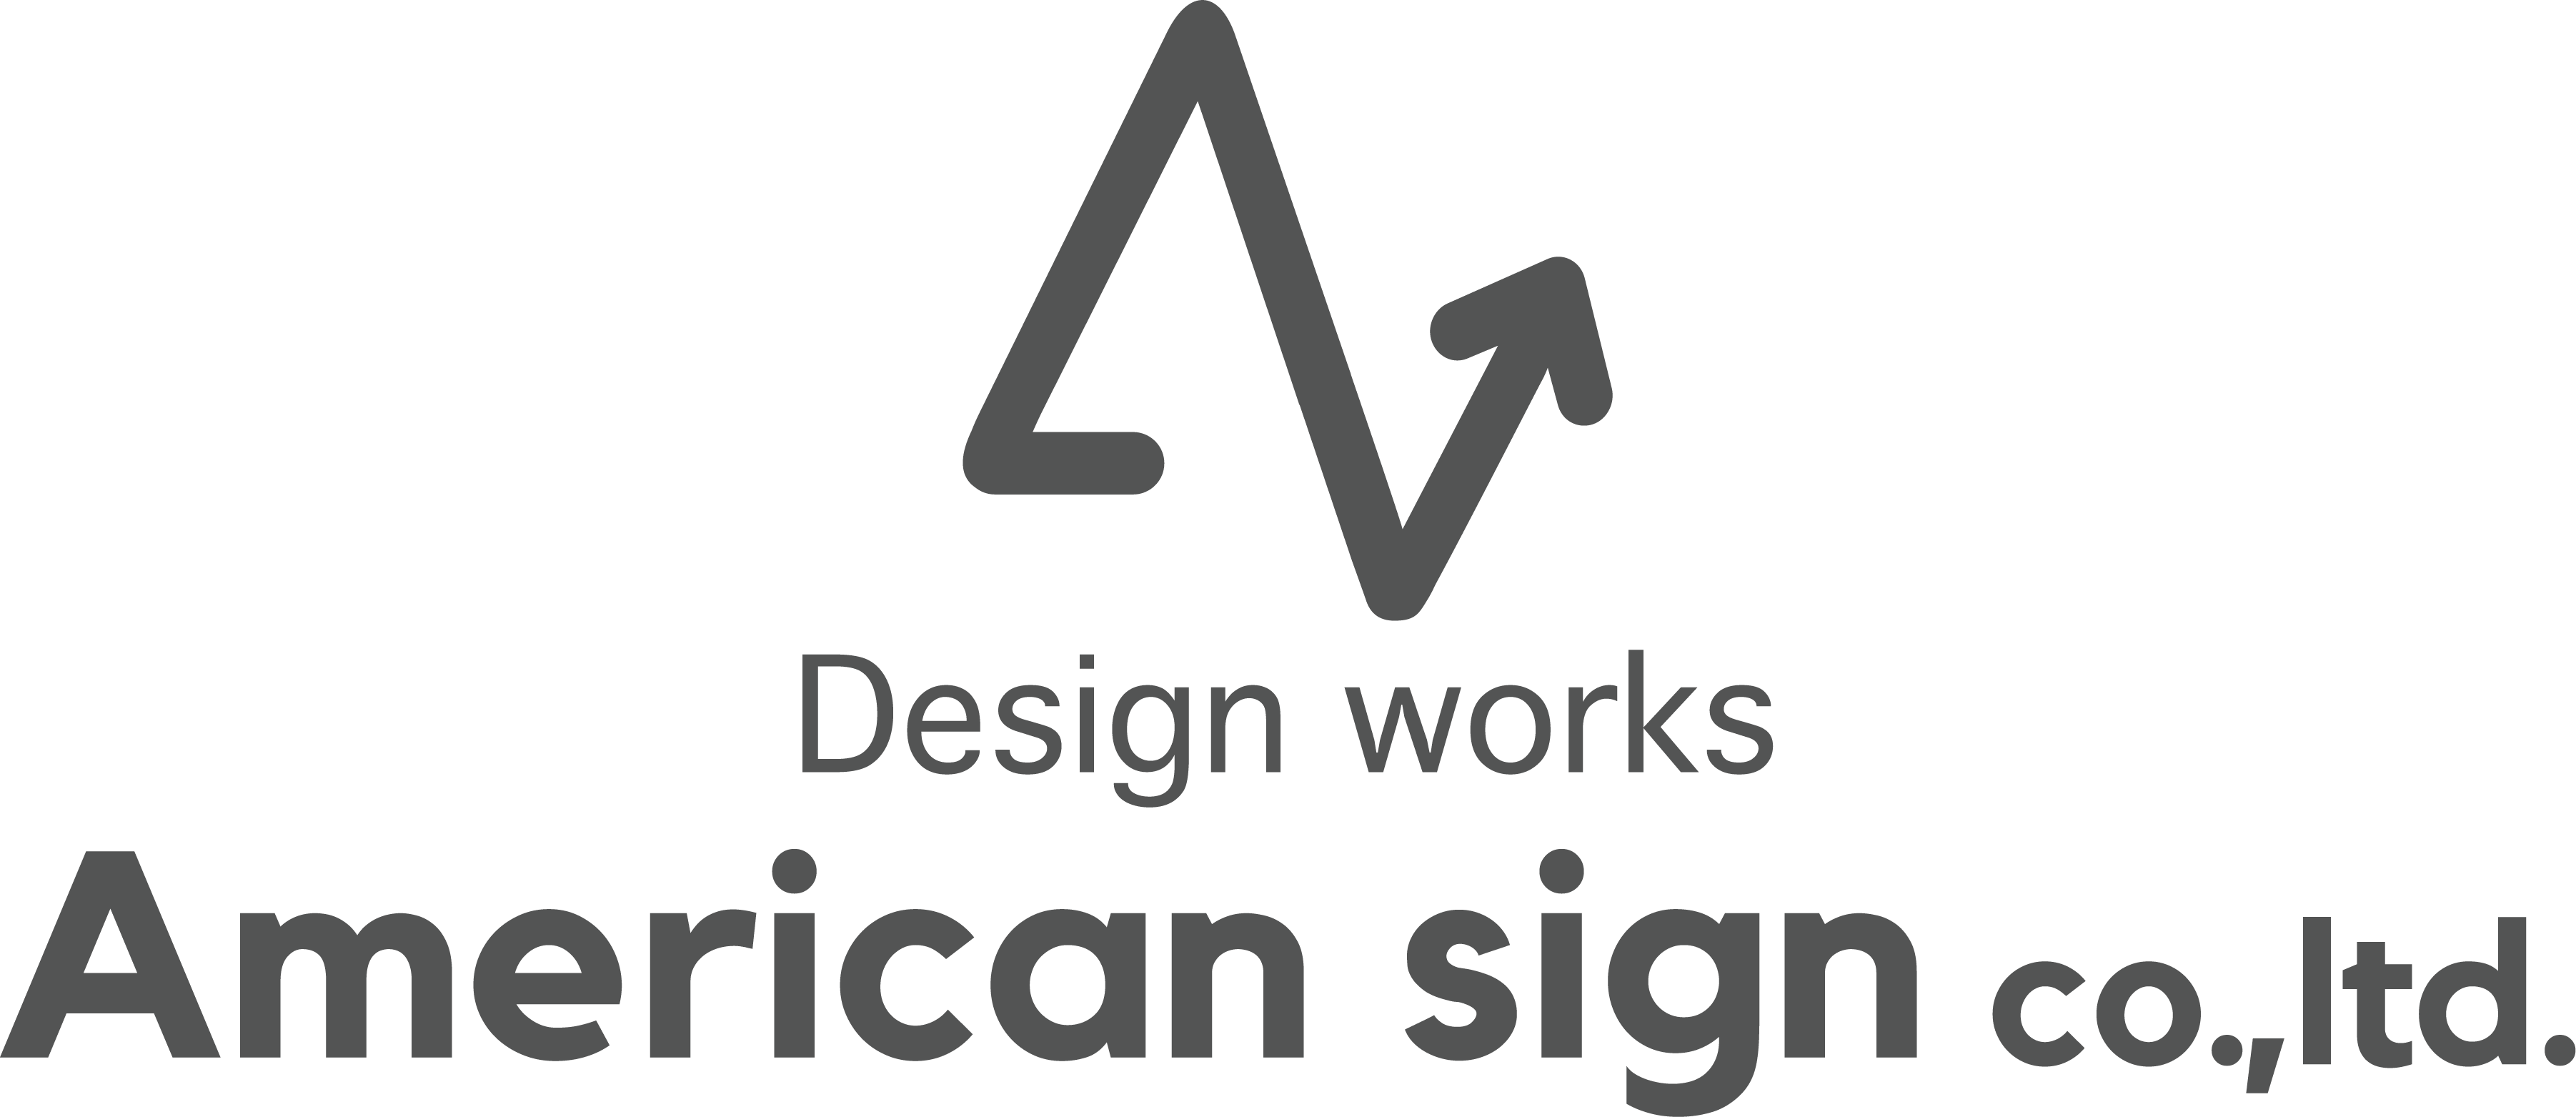 Anerican-sign co.,ltd.